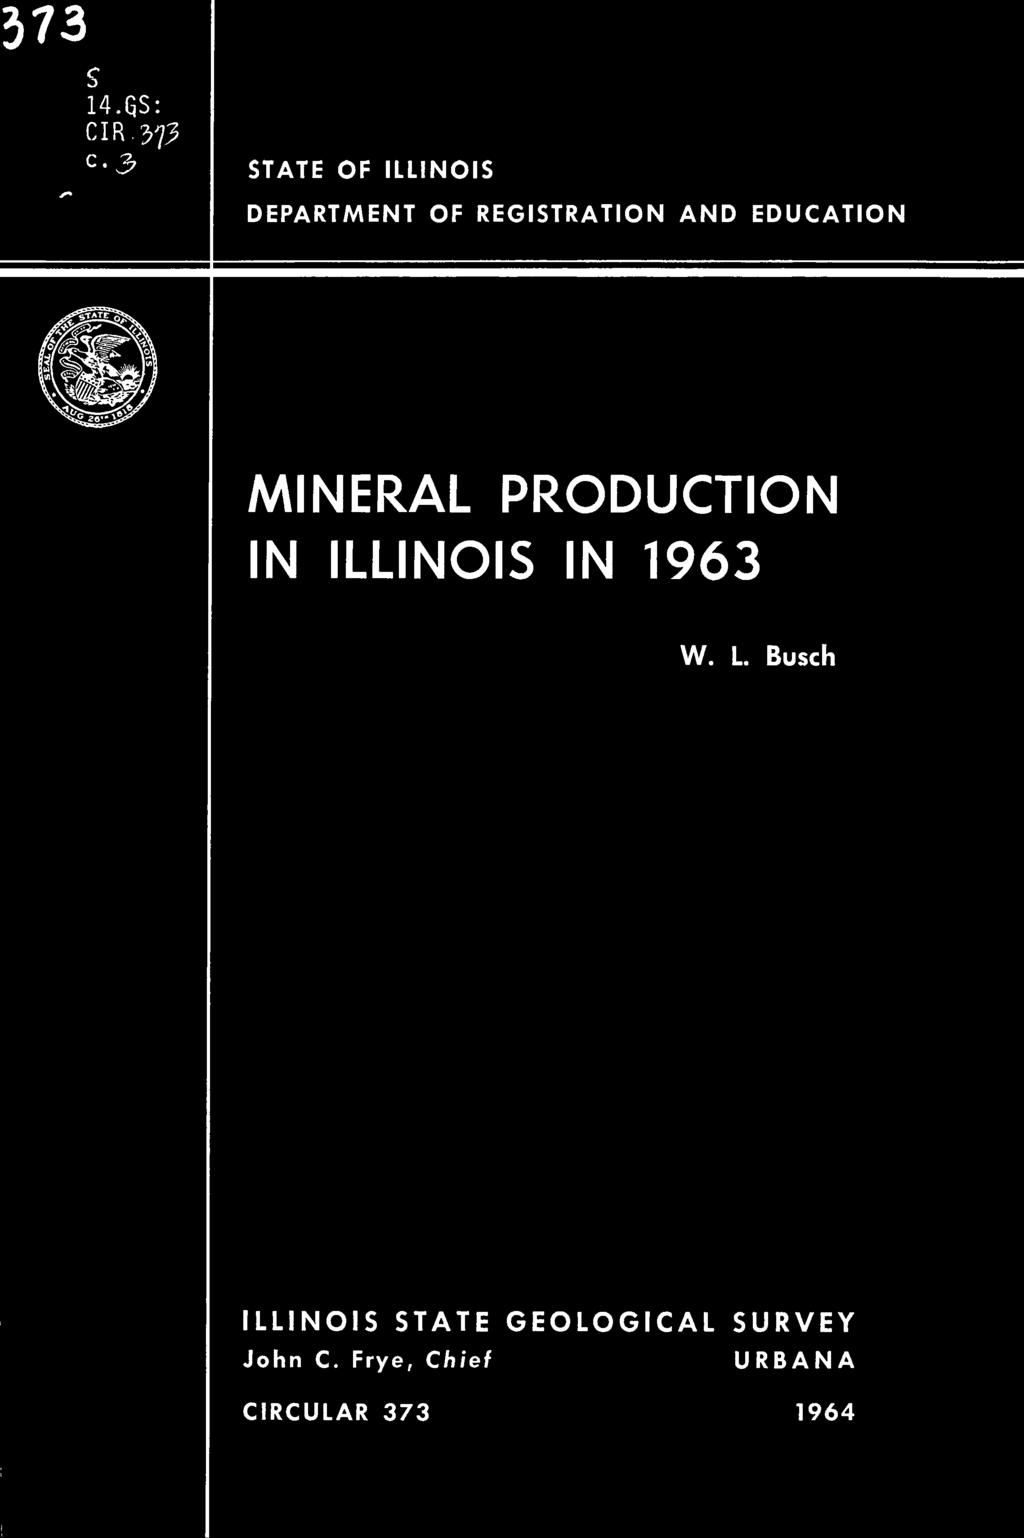 EDUCATION MINERAL PRODUCTION IN ILLINOIS IN 1963 W.